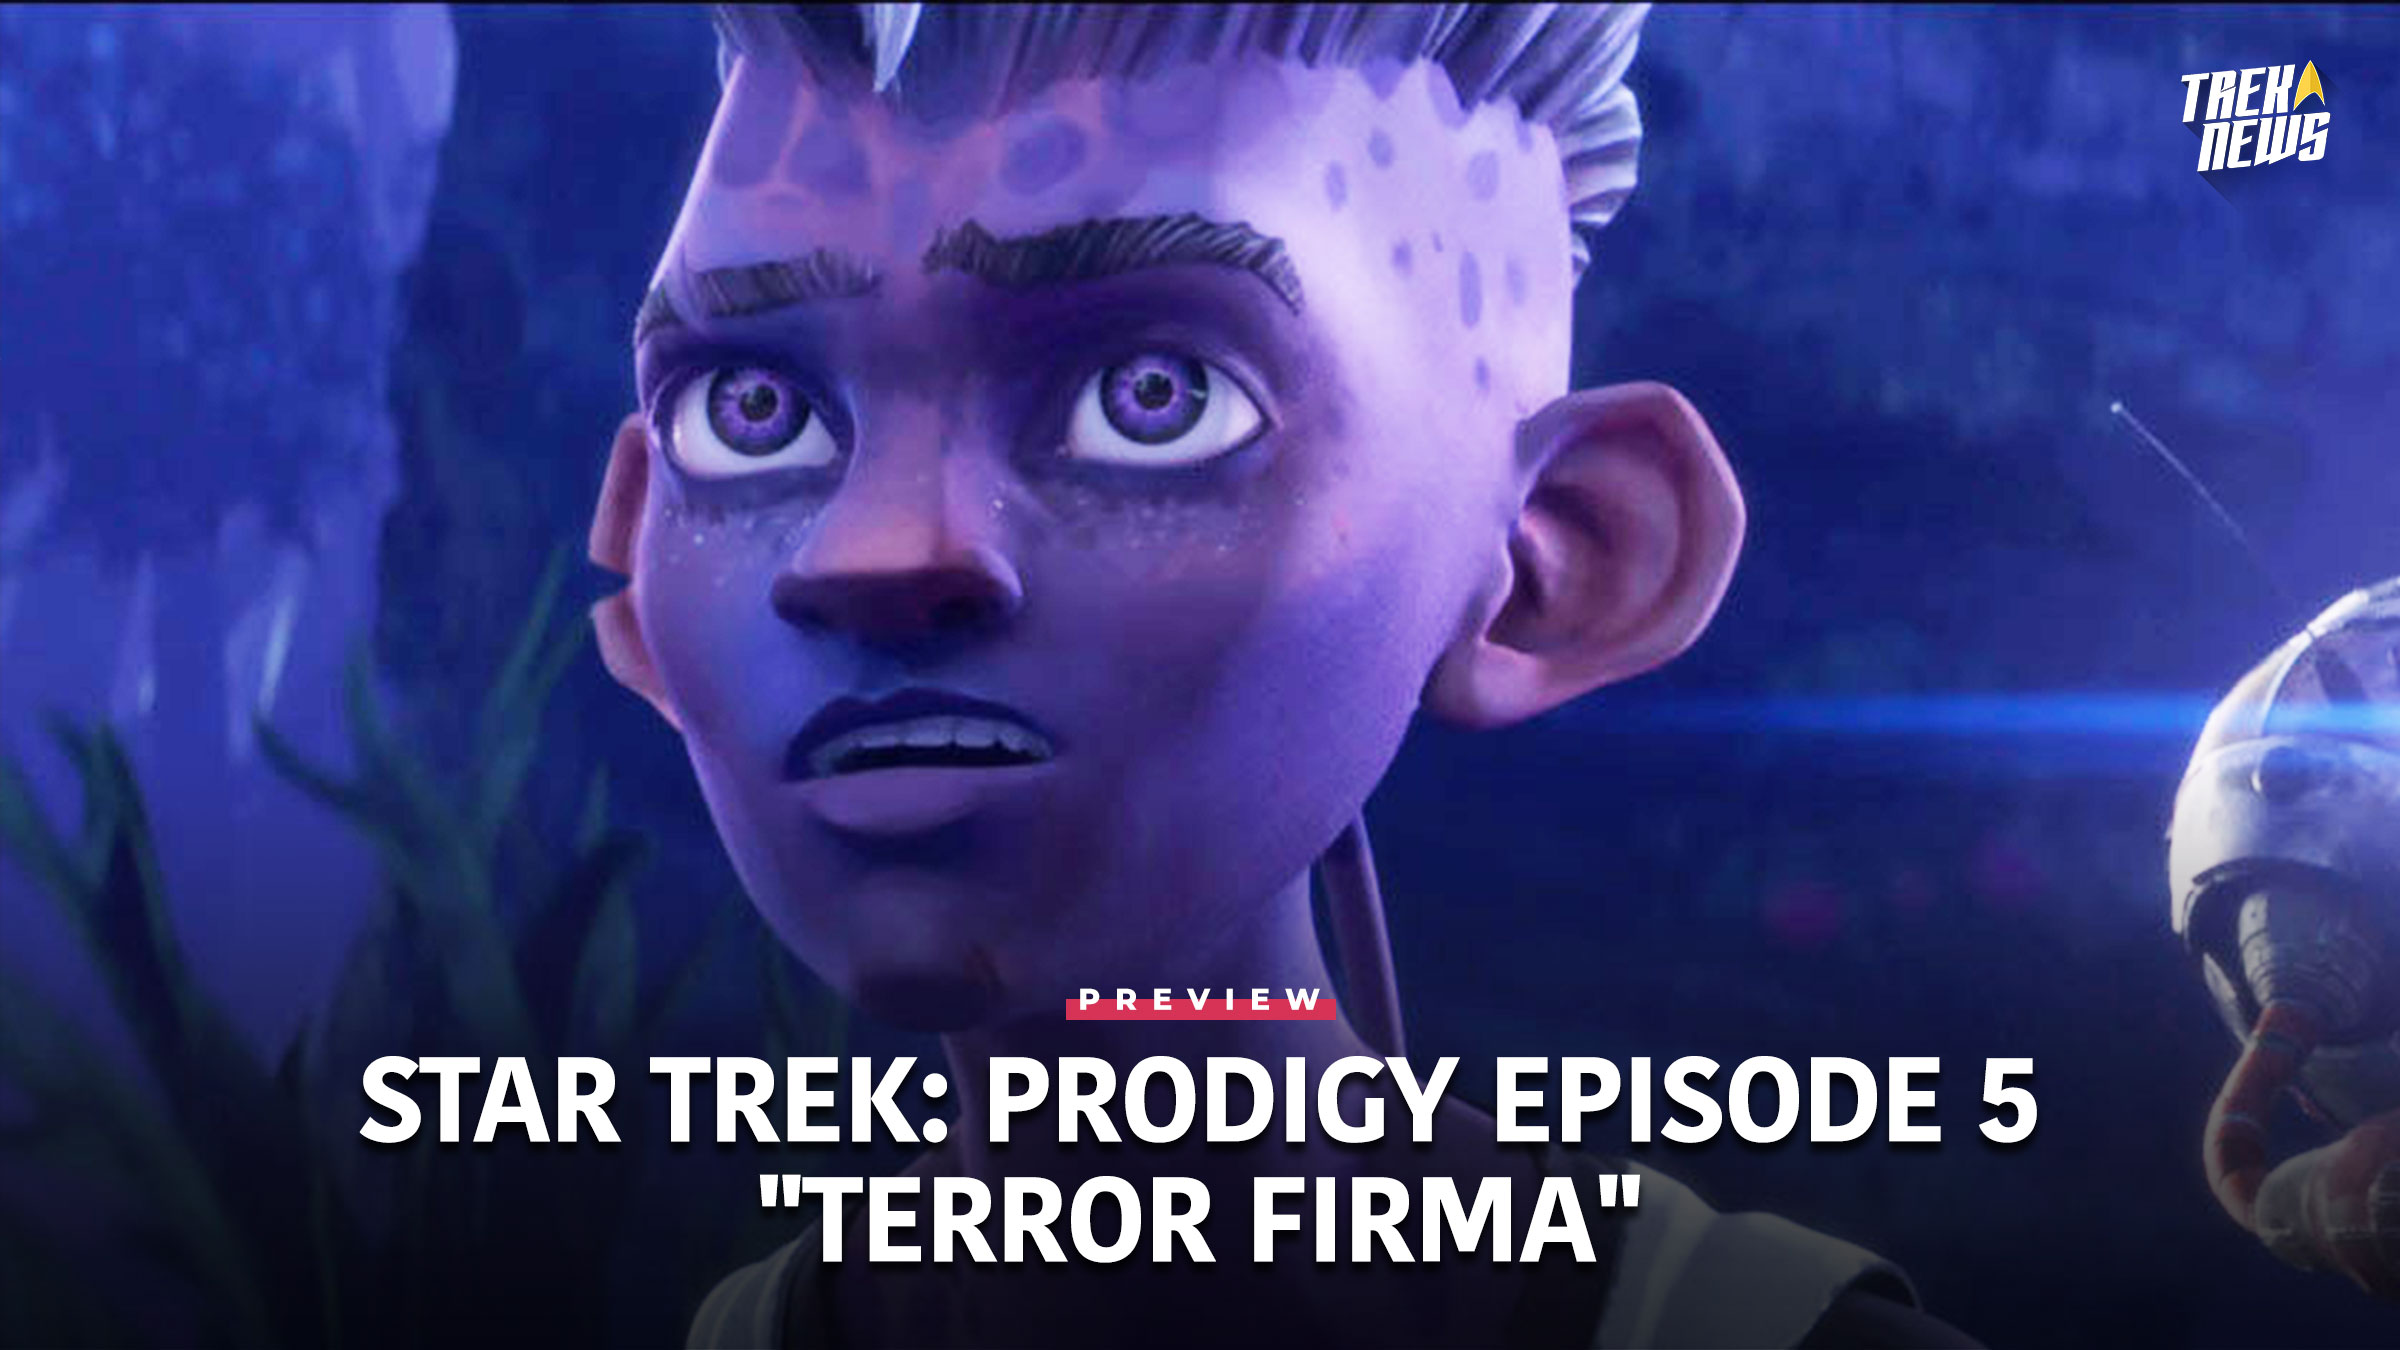 Star Trek: Prodigy Episode 5 “Terror Firma” Preview: The Protostar Crew Is Marooned On A Dangerous Planet